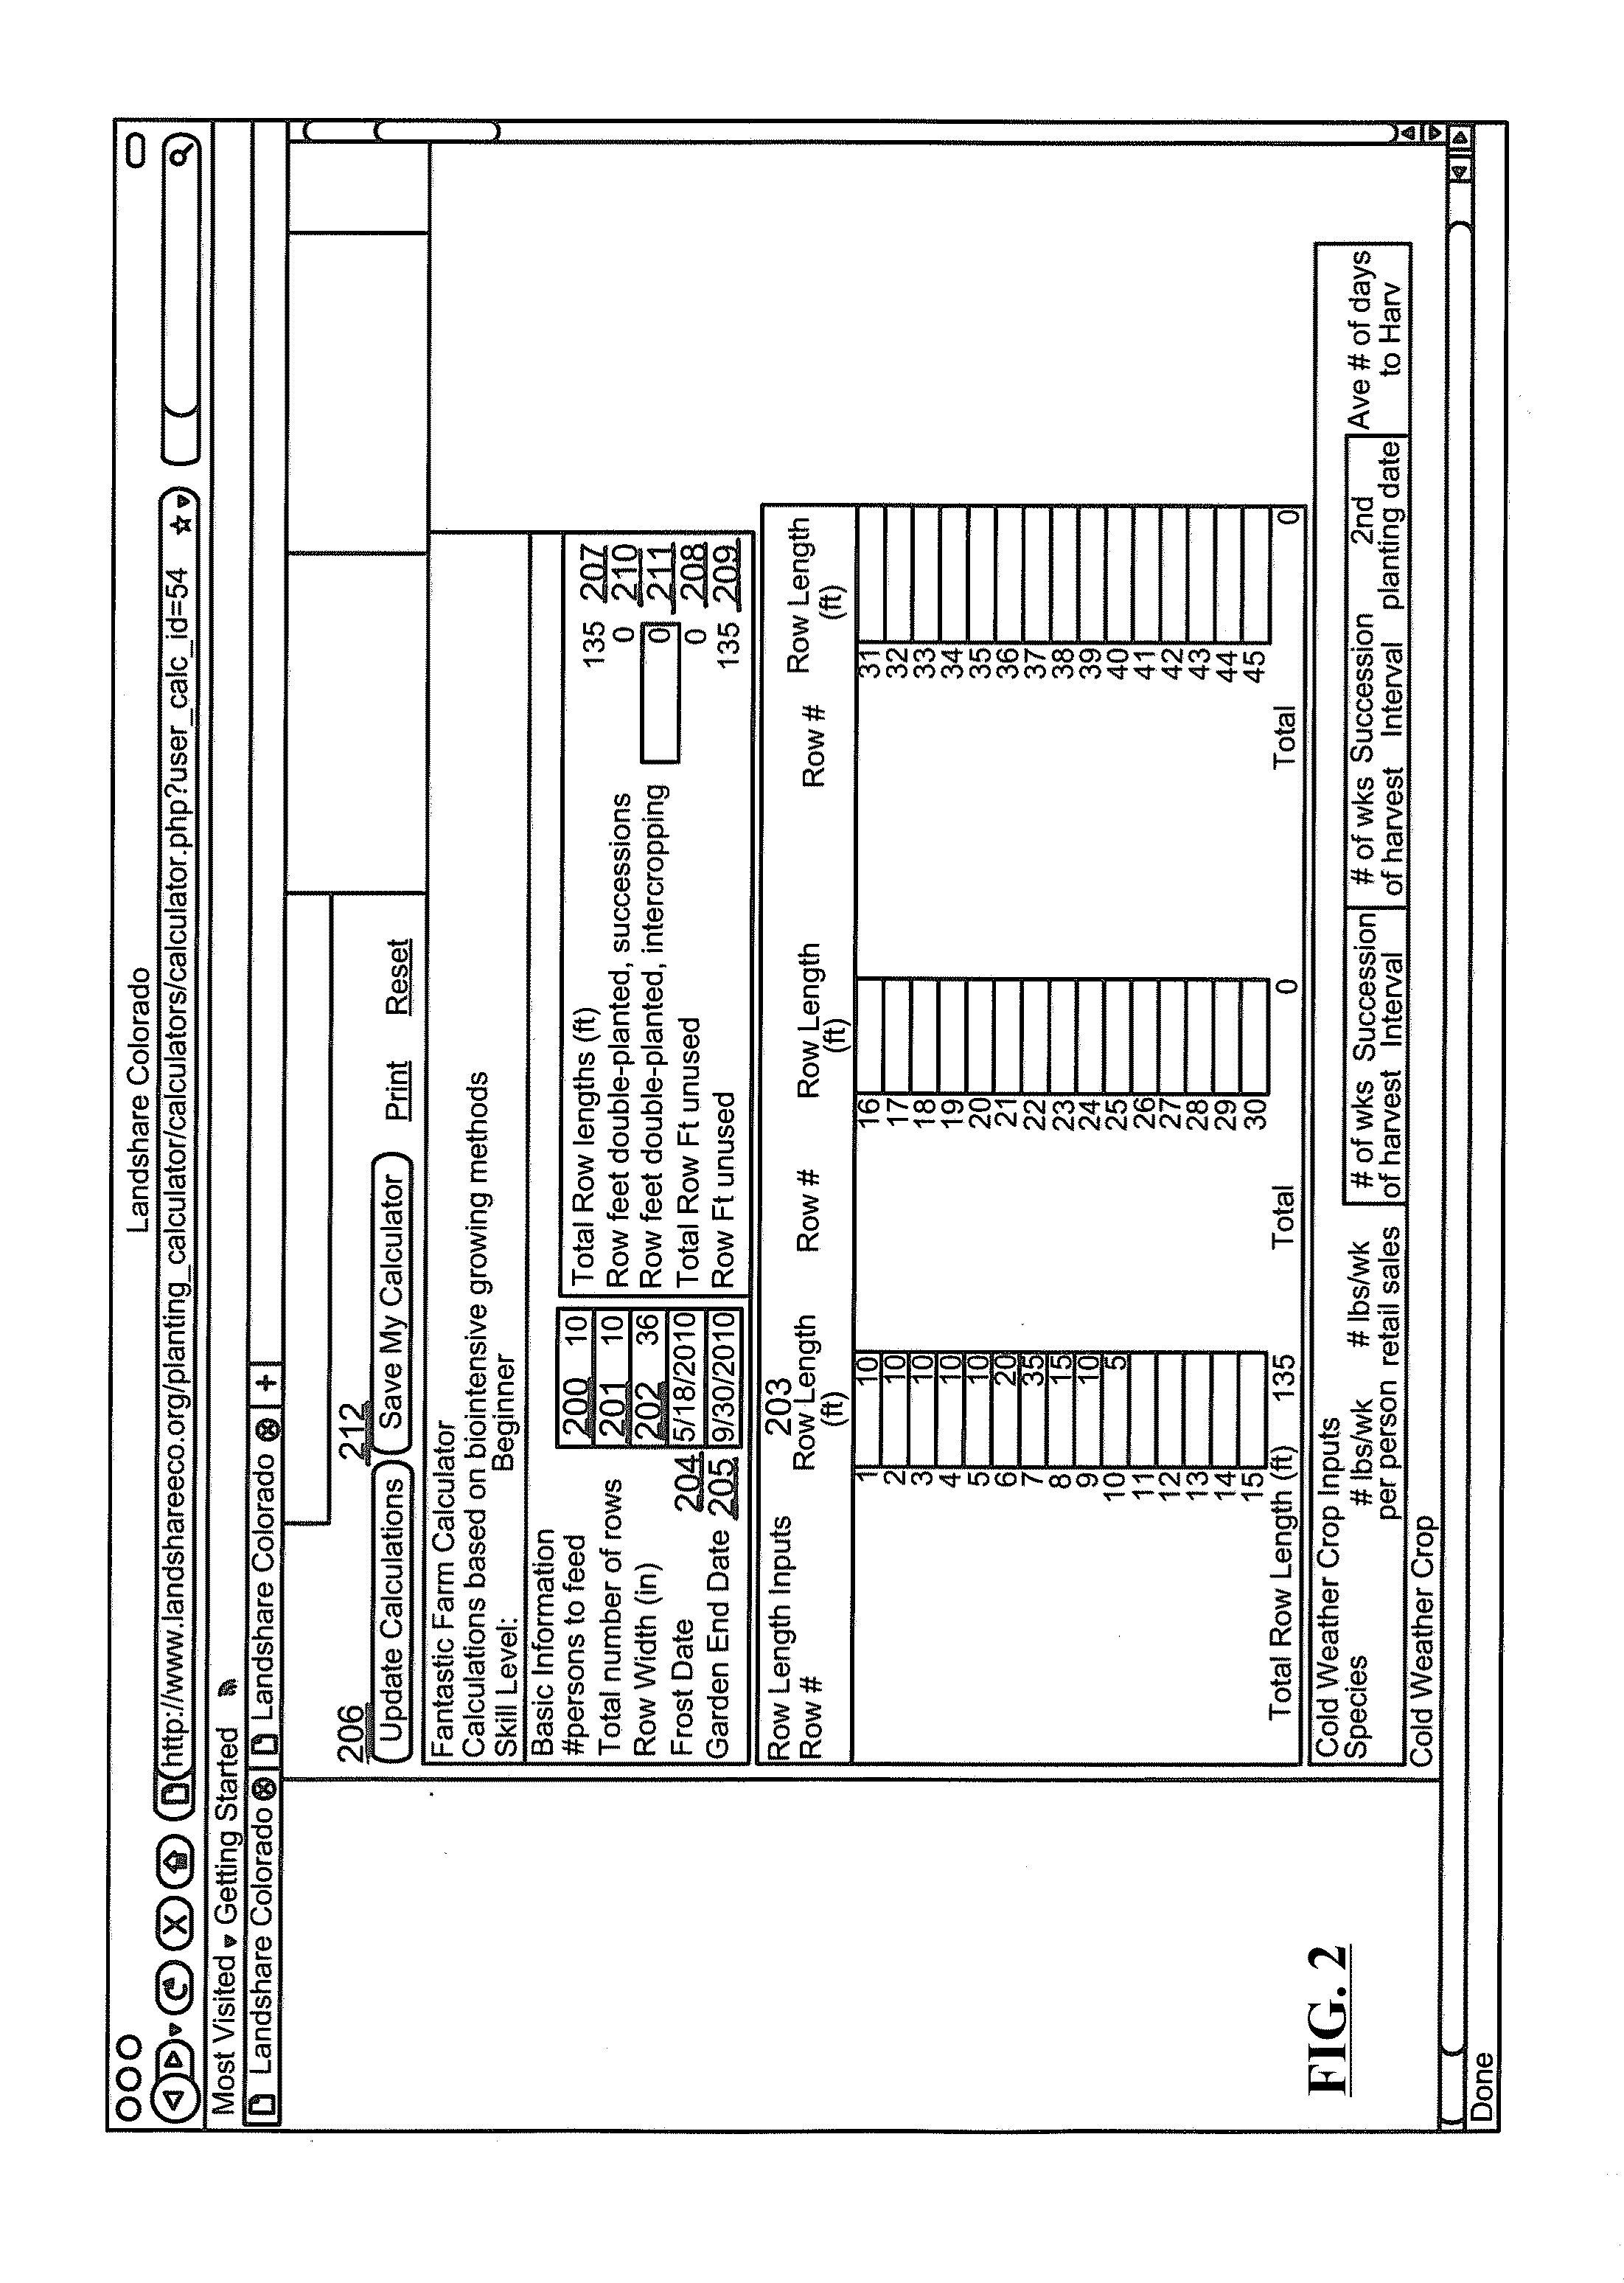 Method and apparatus for managing production complexity of high yield, multiple crop gardening and sustainable farming operations